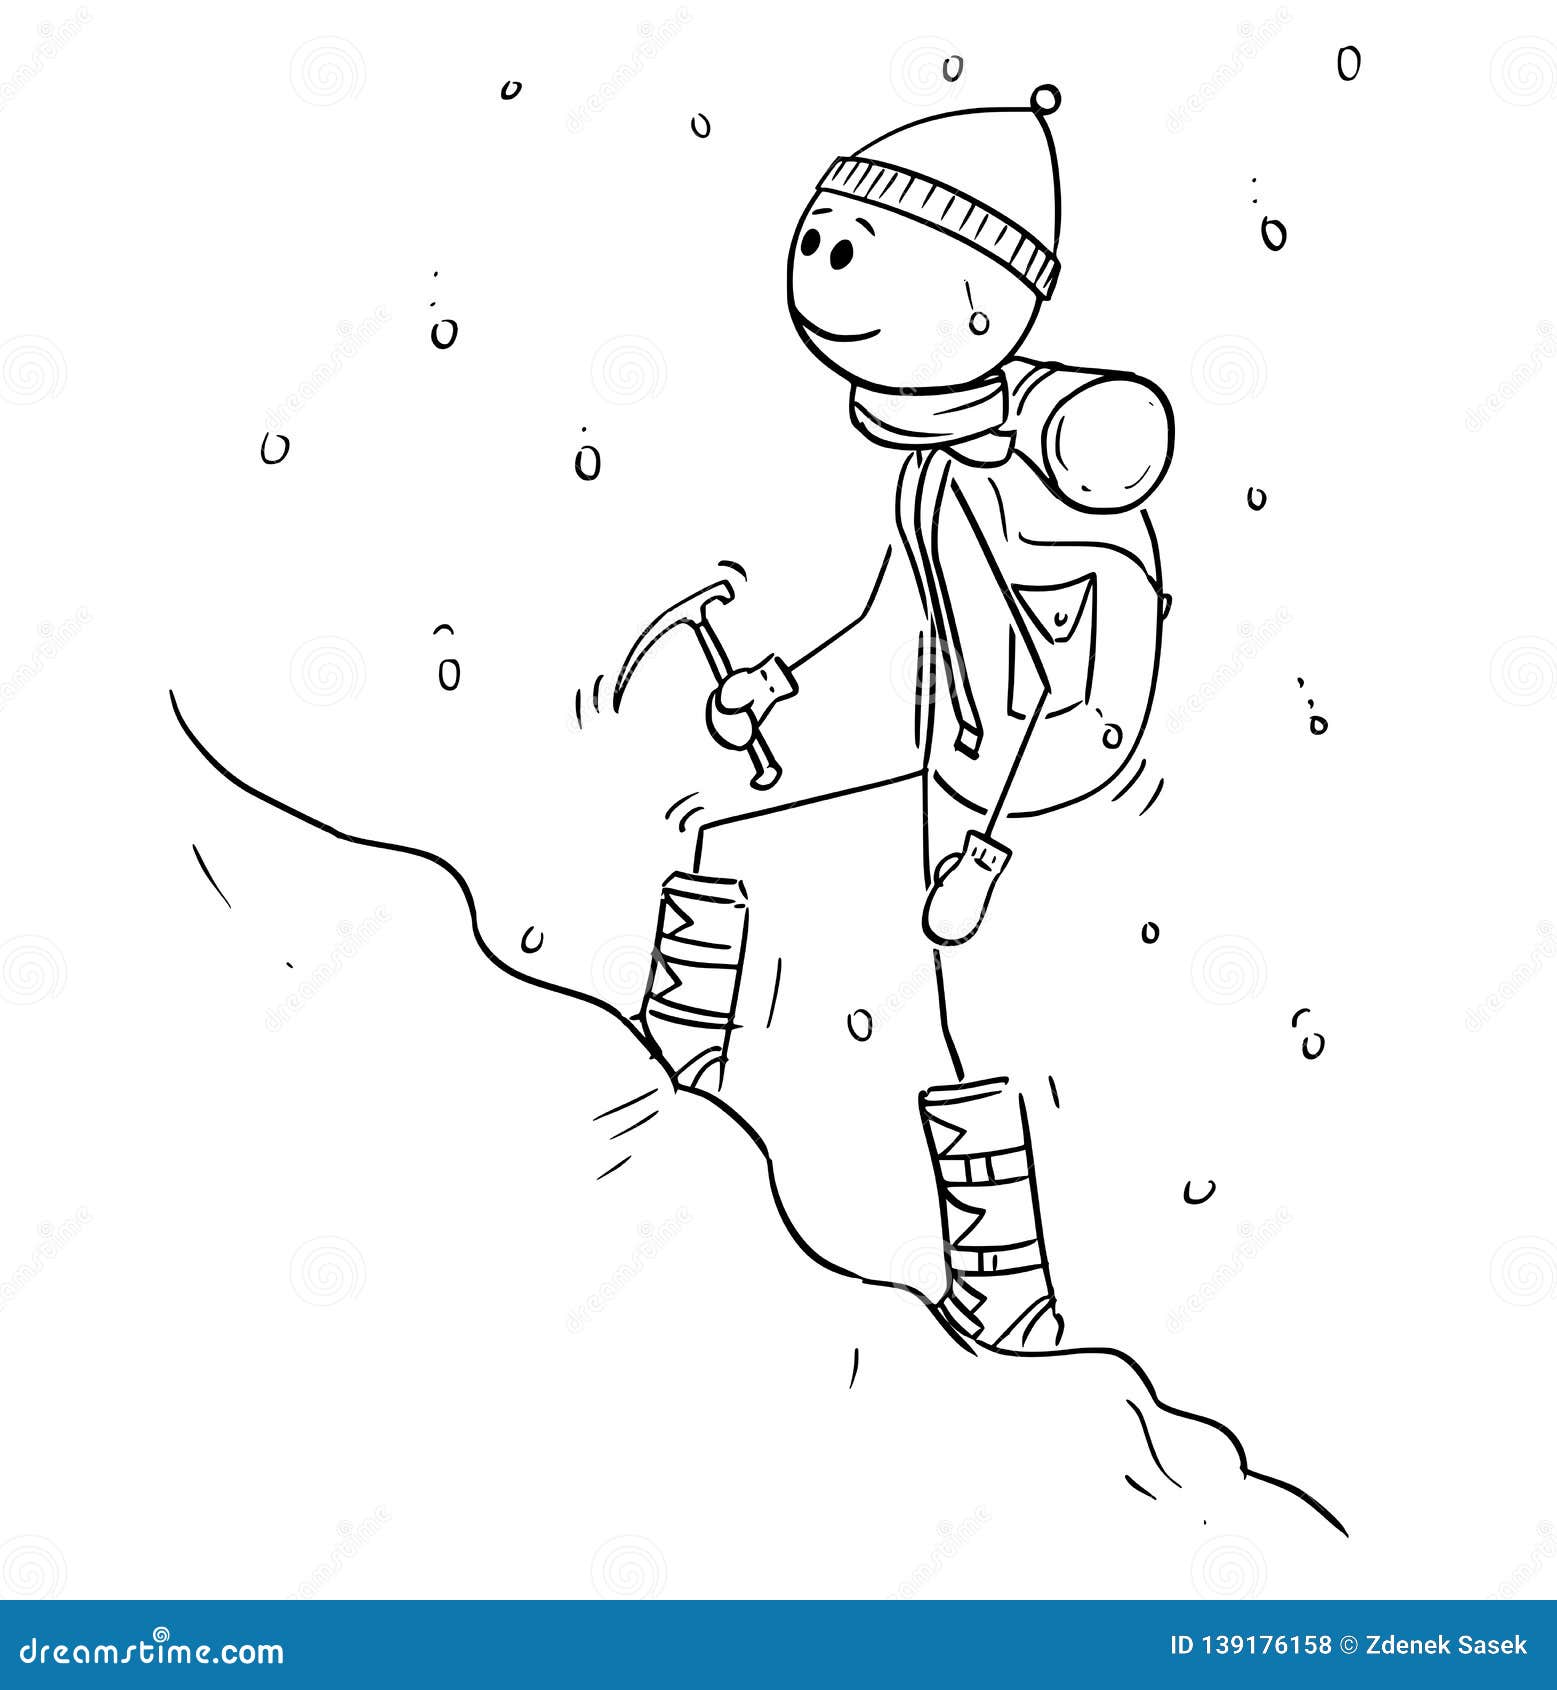 cartoon drawing of mountaineer or alpinist walking through snow